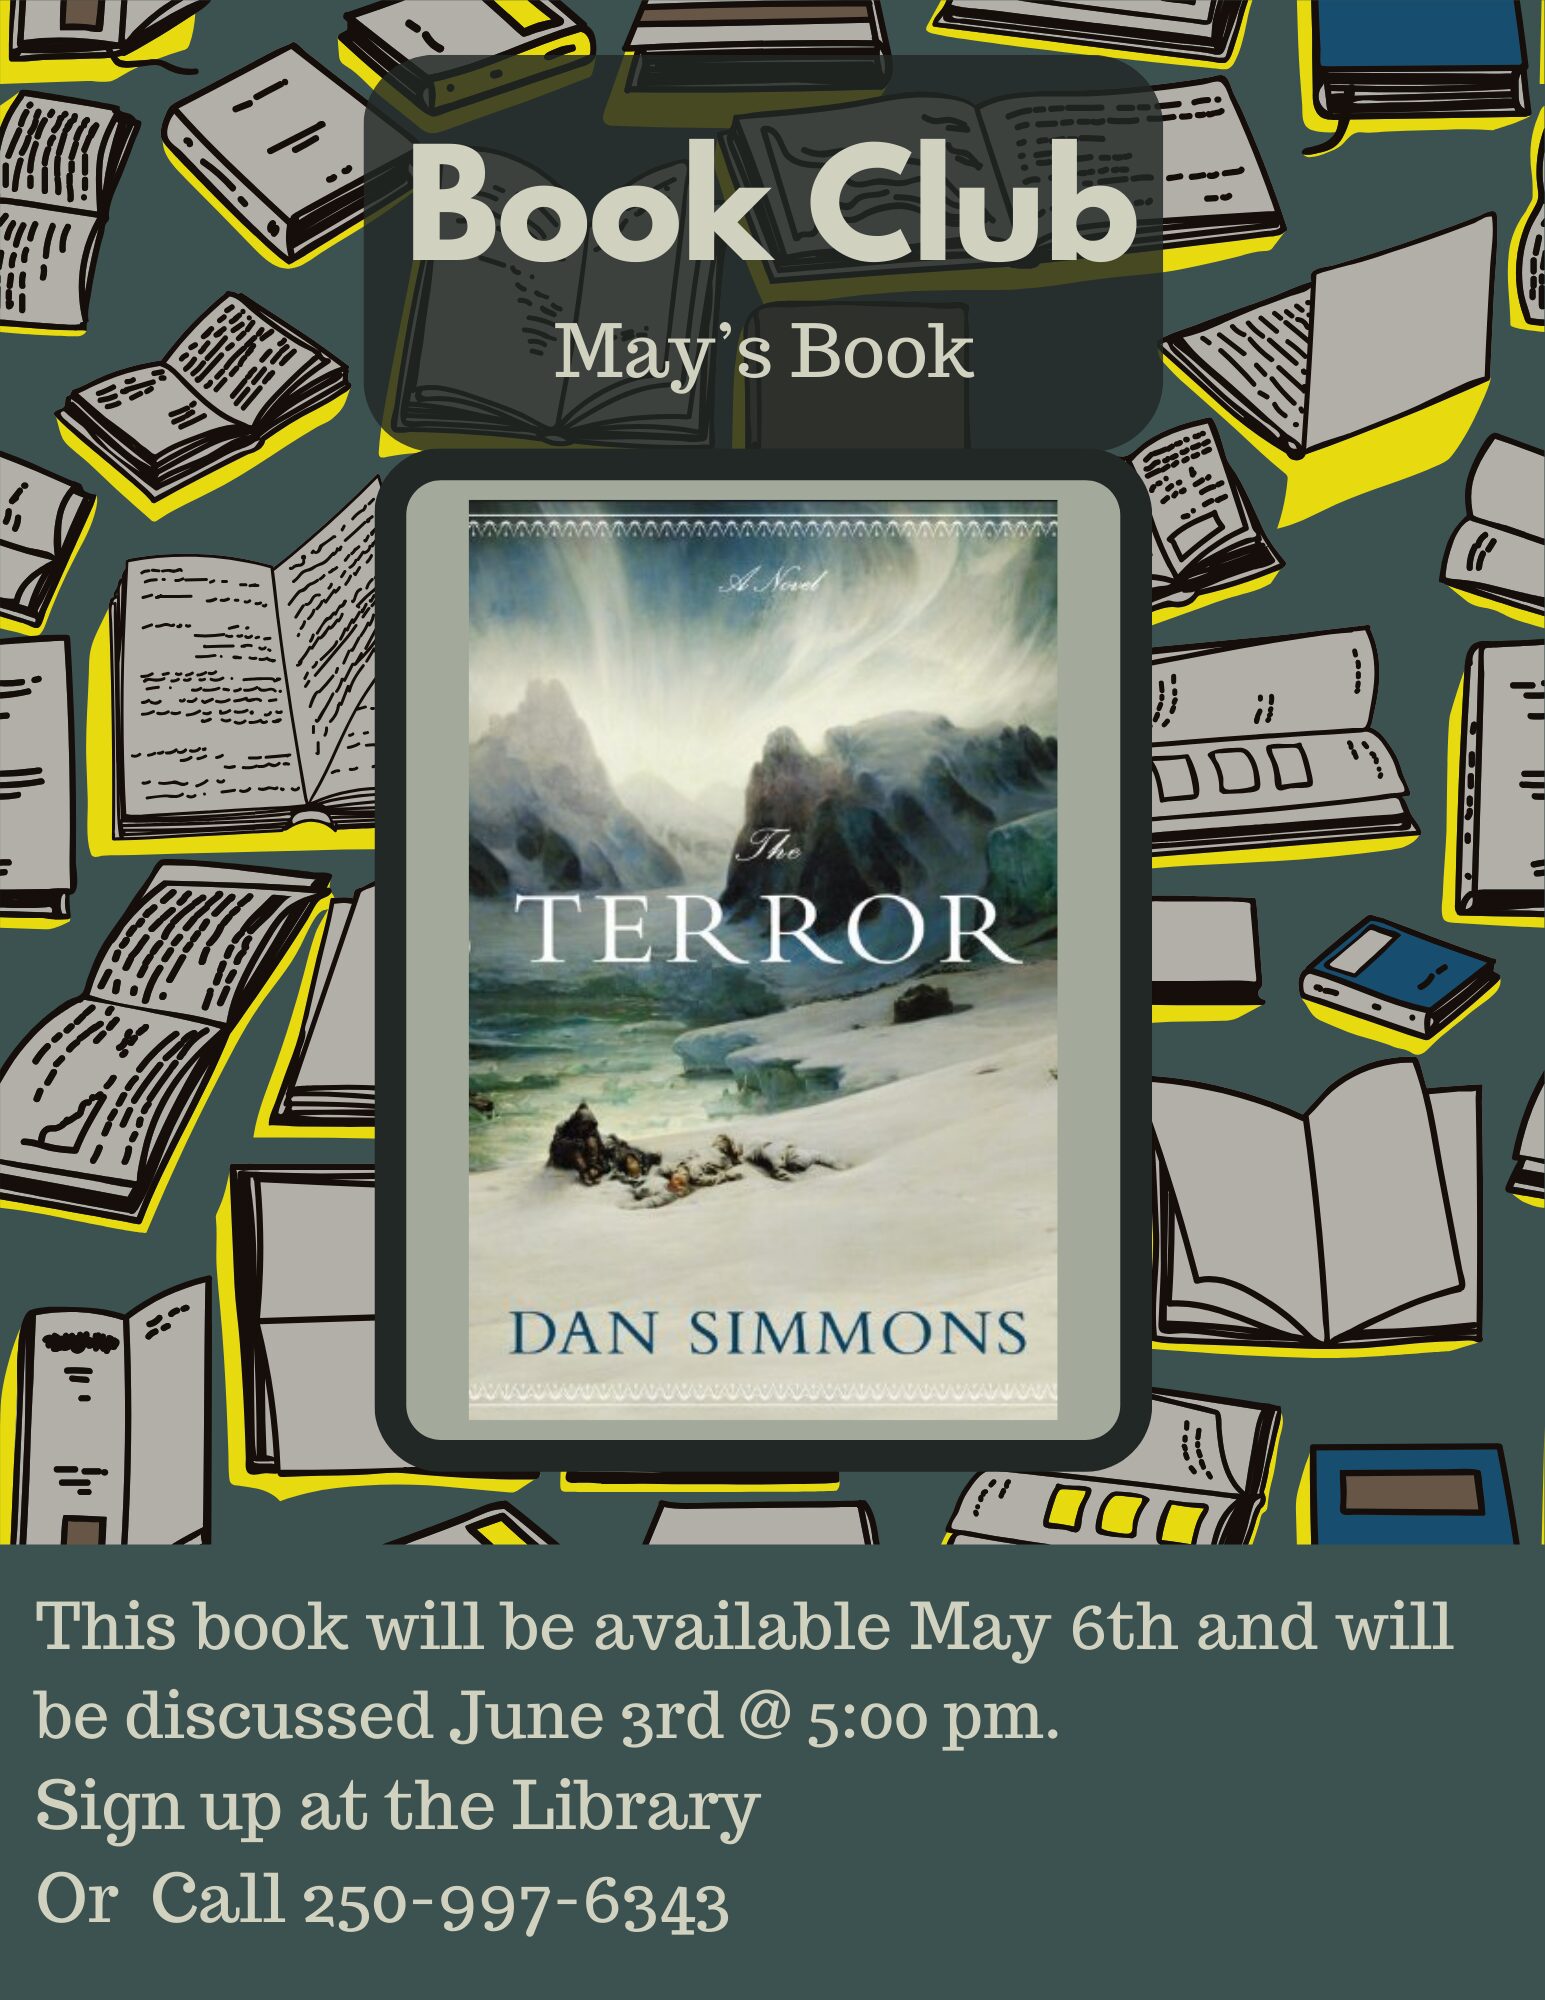 Book Club May's Book The Terror by Dan Simmons This Book will be available May 6th and will be discussed June 3rd @ 5:00pm Sign up at the library or call 250-997-6343